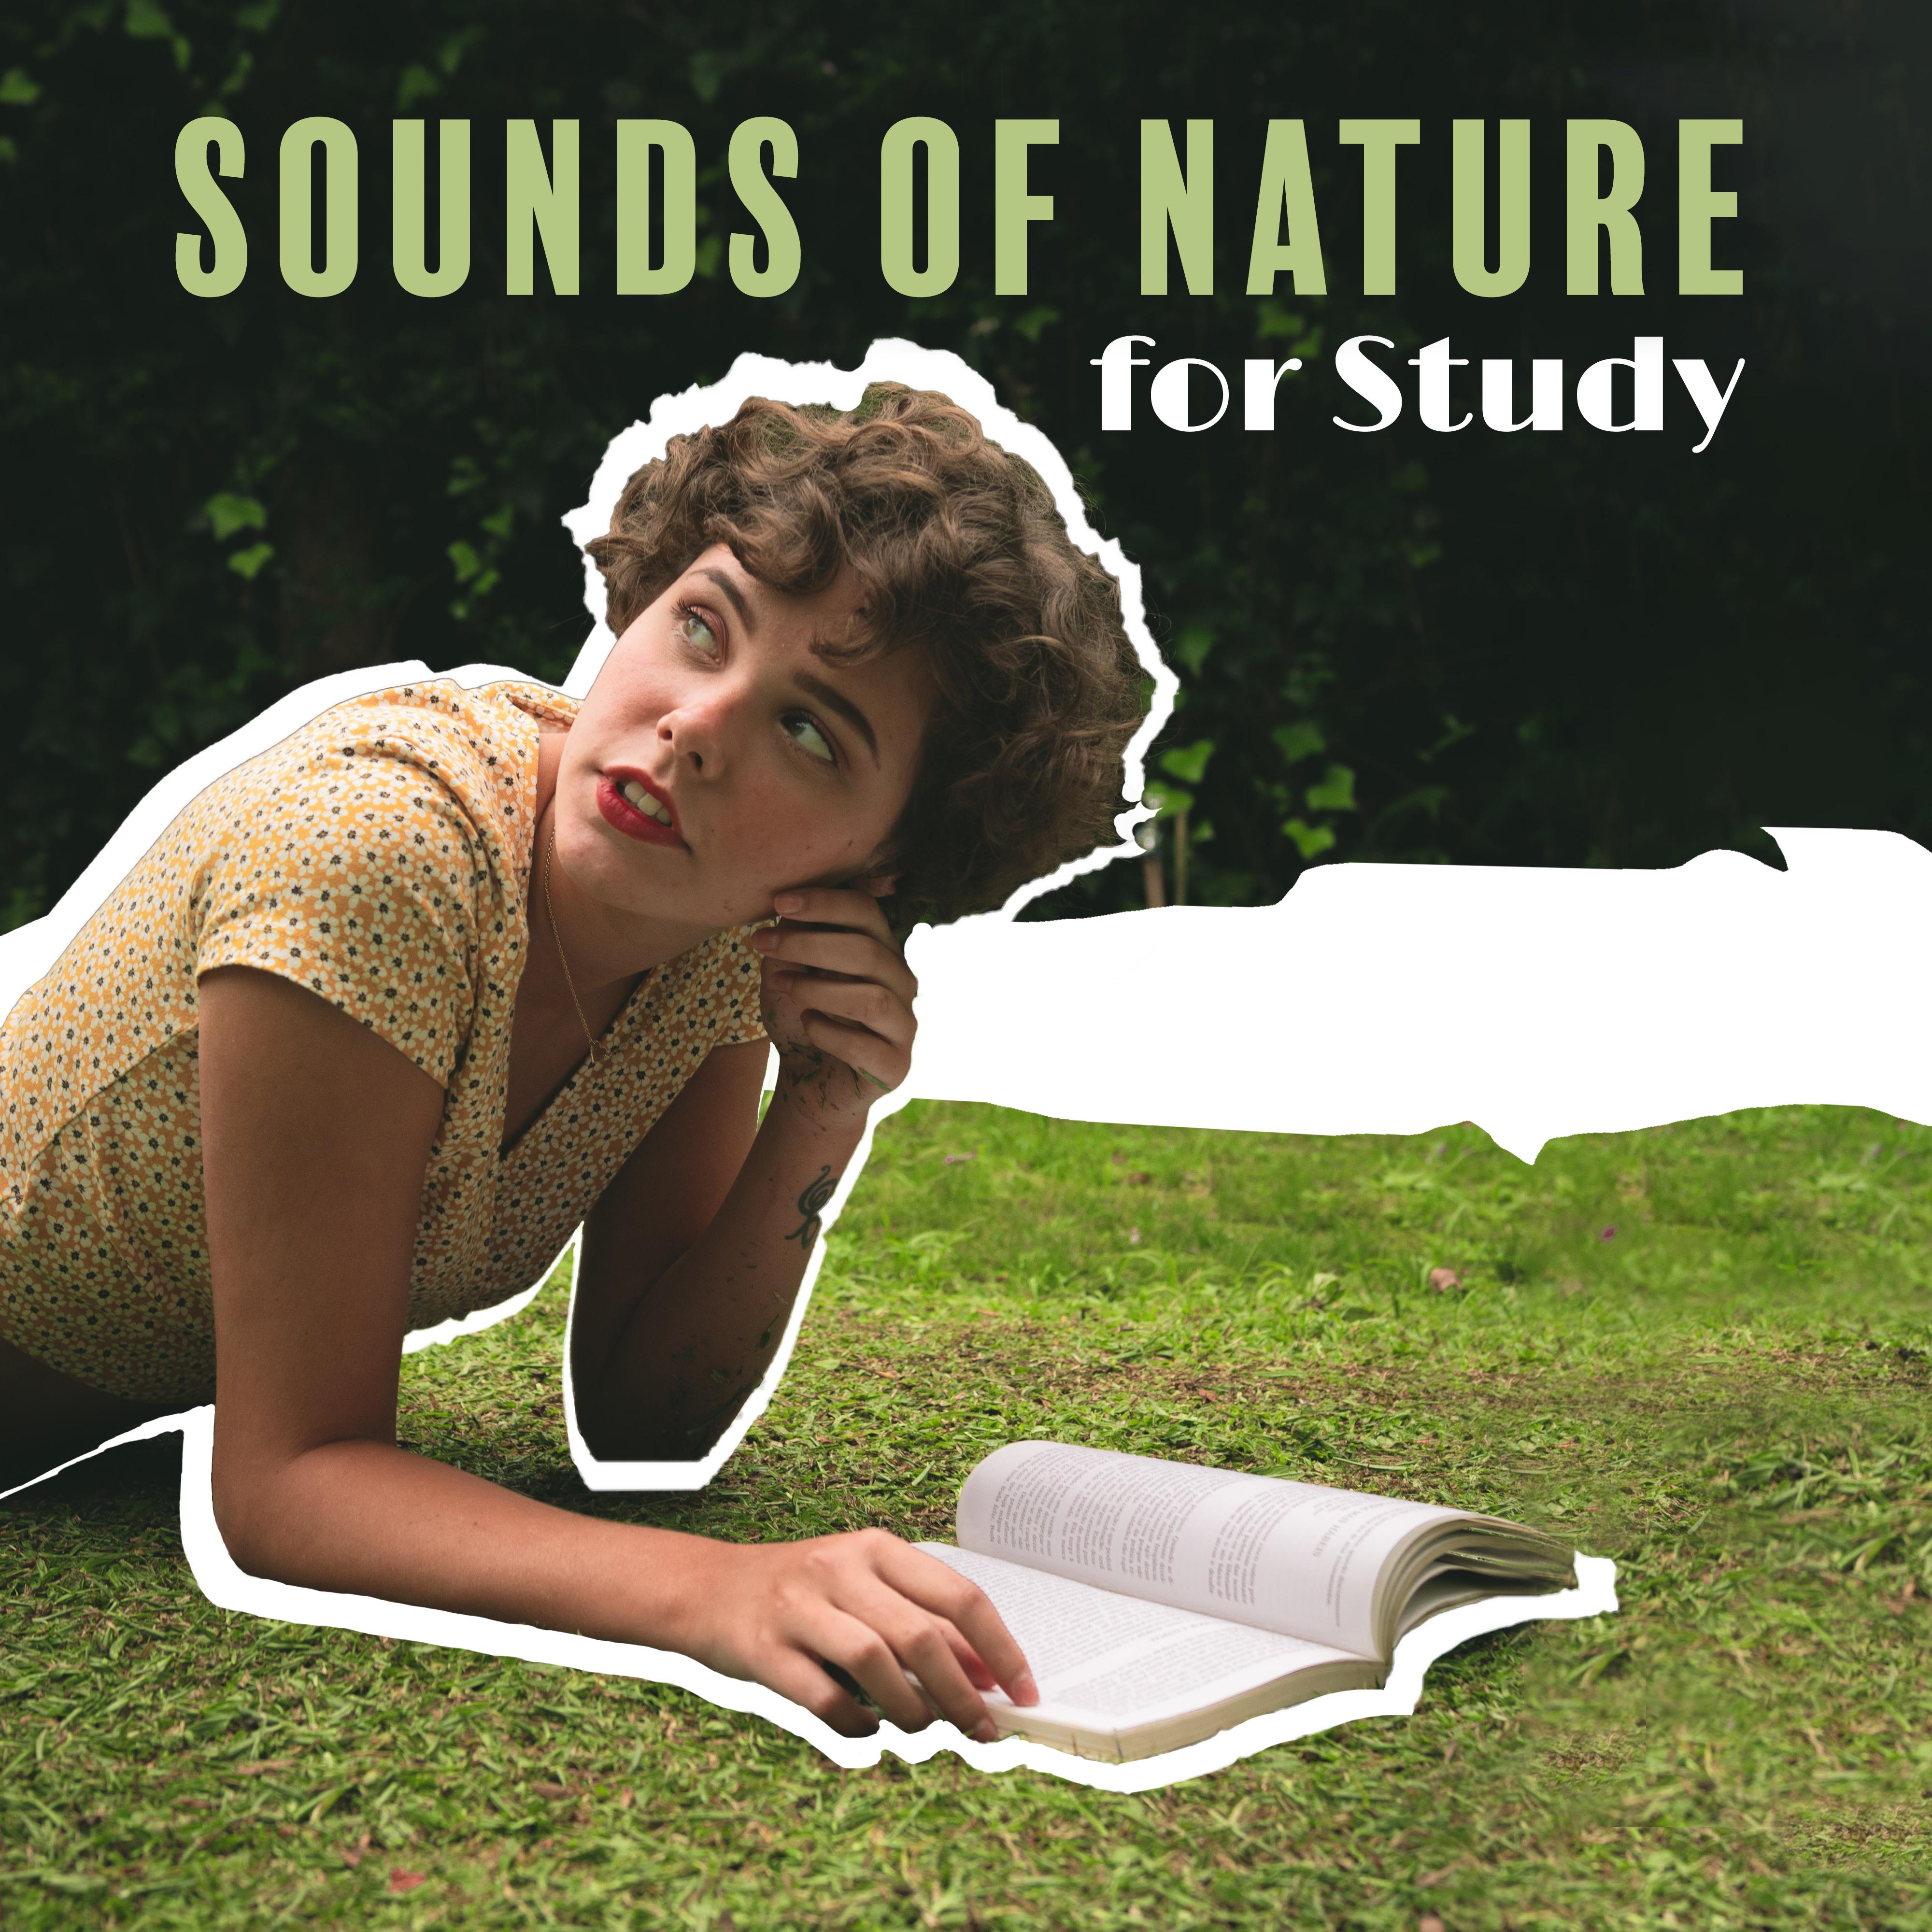 Sounds of Nature for Study  Music for Mind, Deep Concentration, Reduce Stress, Calm Down, Deeper Focus, Brain Power